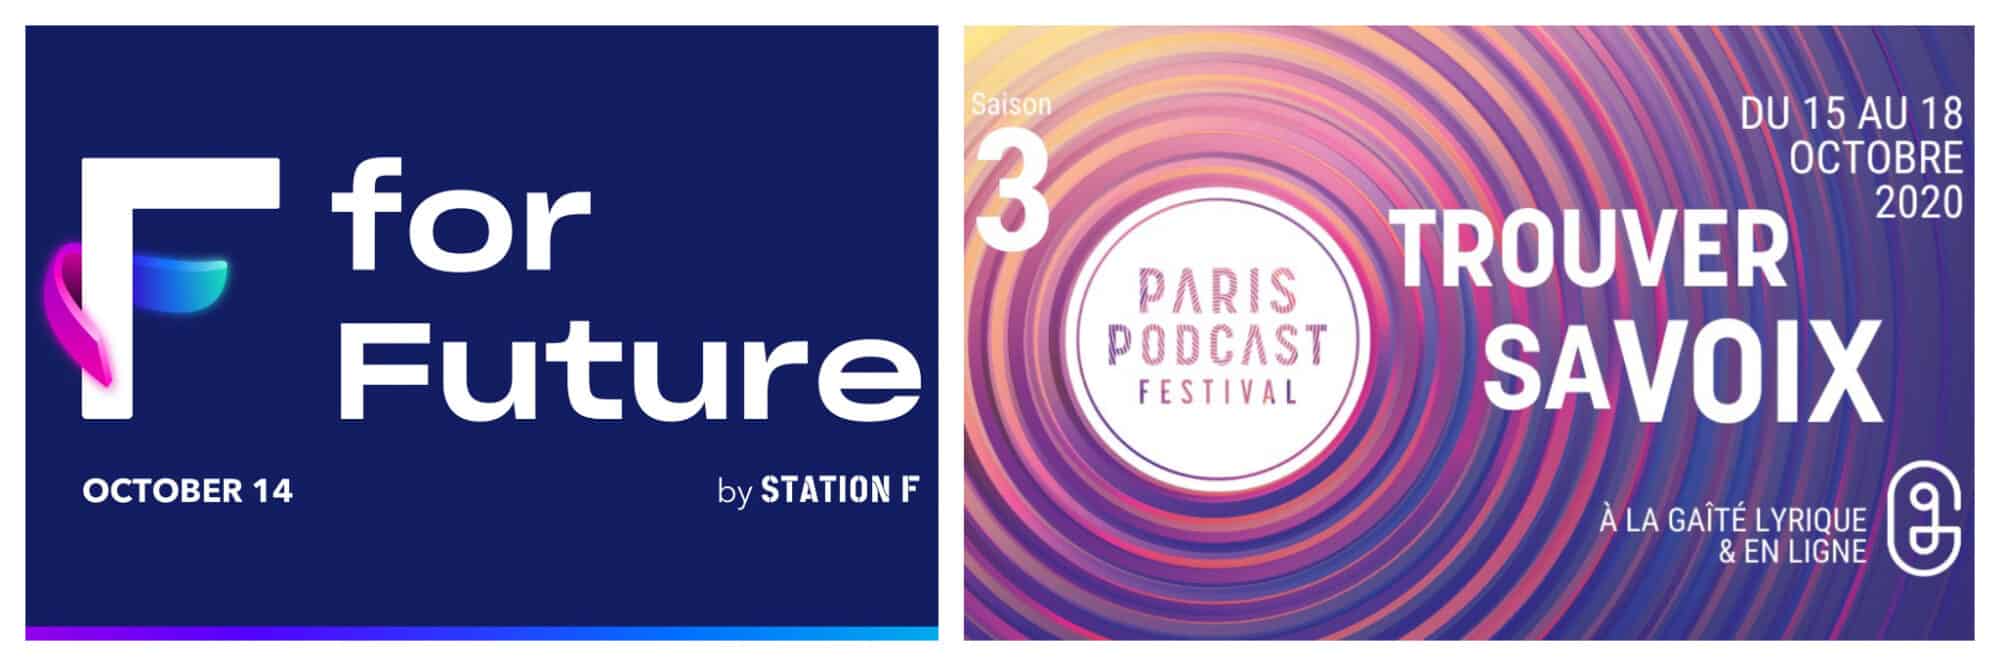 Left: a promotional image for F for Future at Station F. Right: a promotional image for Paris Podcast Festival.